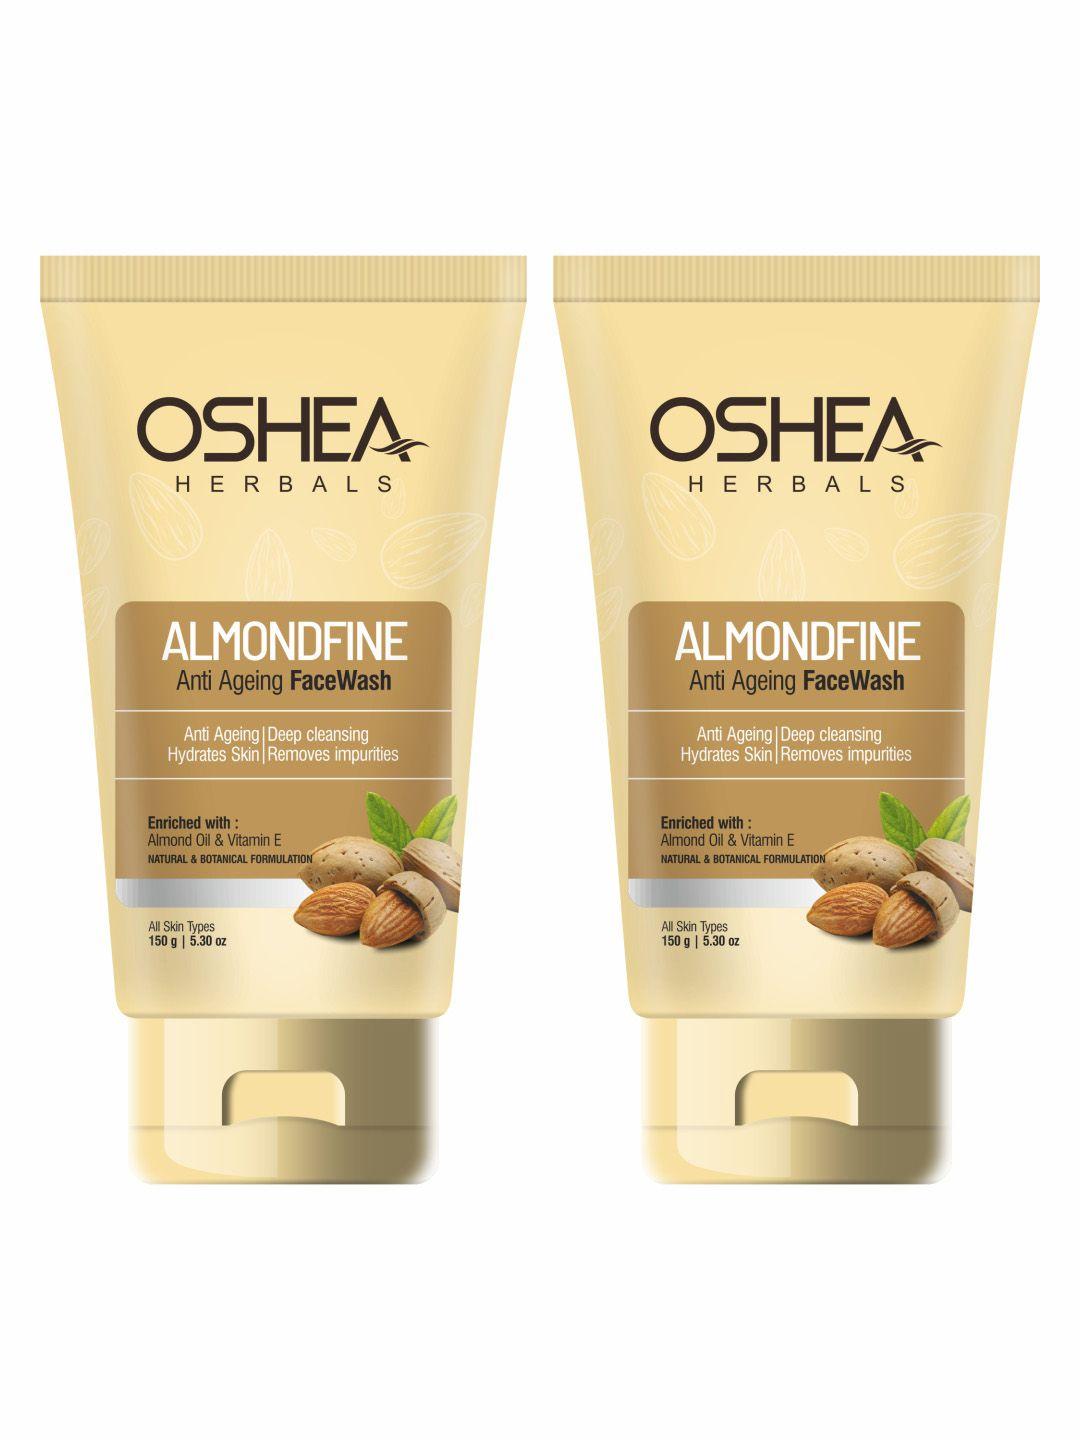 oshea herbals set of 2 almondfine anti ageing face wash